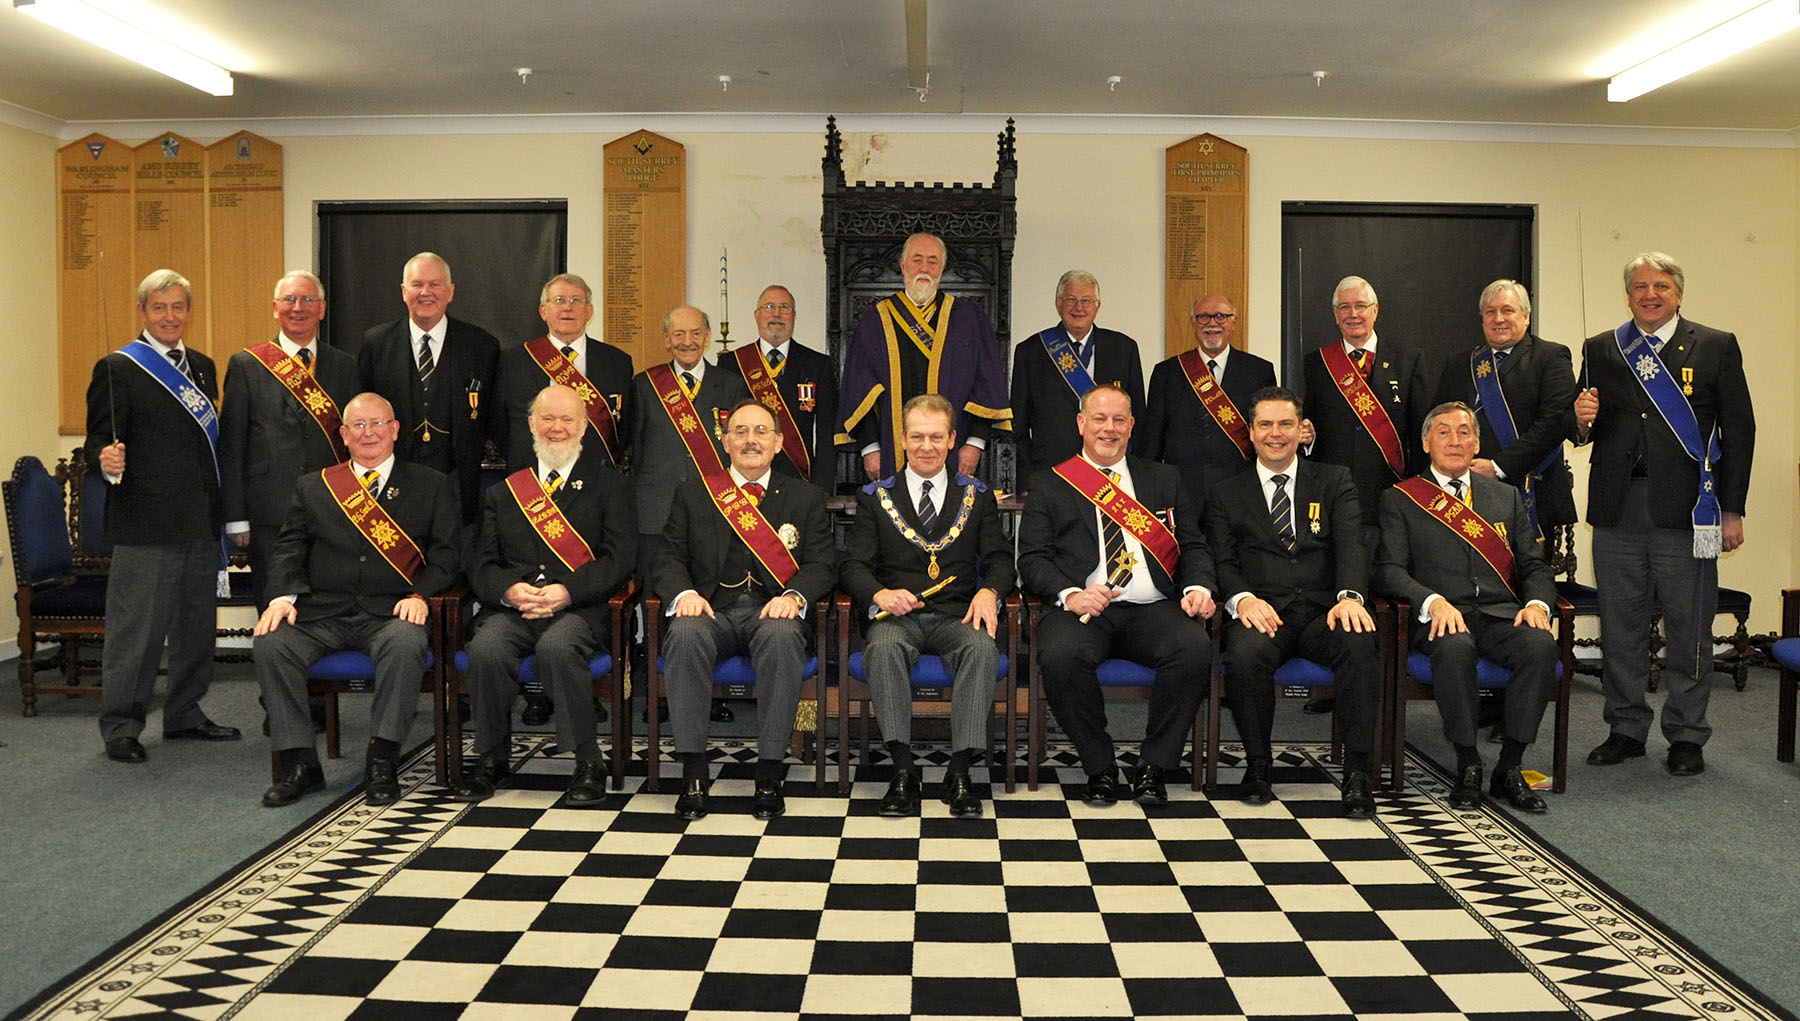 Warlingham Conclave Assembly of Princes